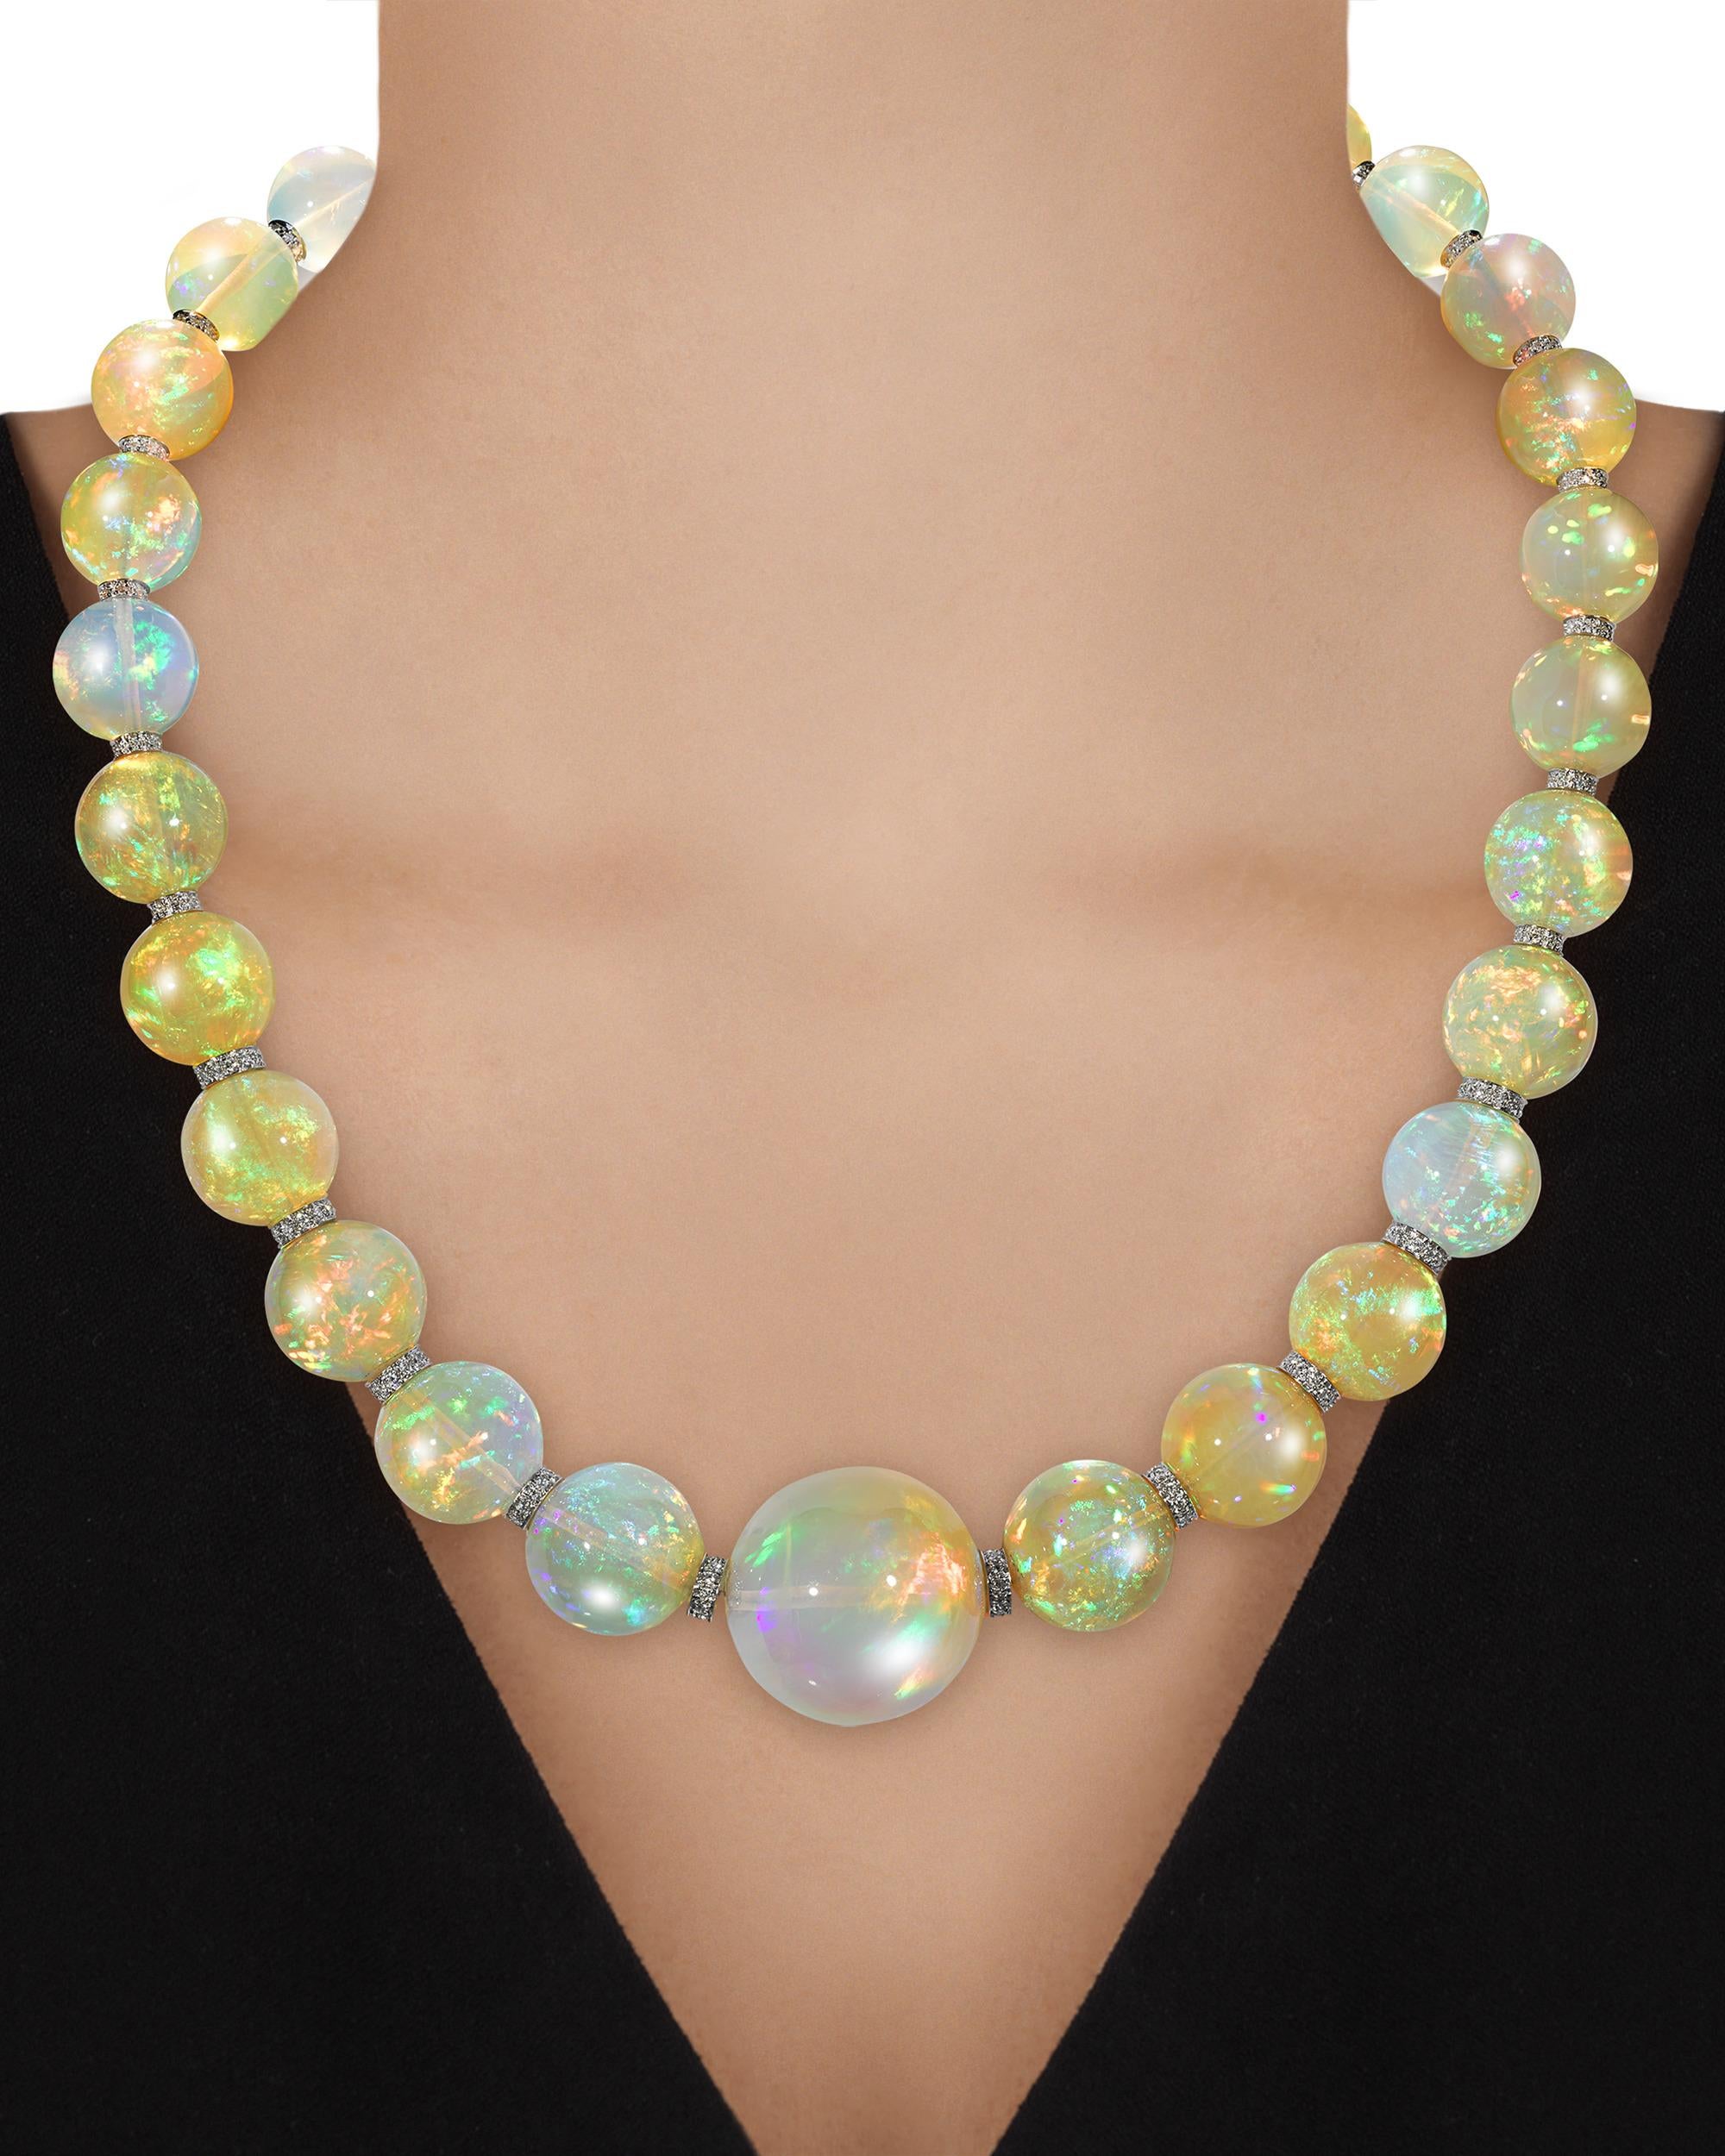 Twenty-nine solid opal beads totaling an extraordinary 554.00 carats comprise this mesmerizing necklace. The graduated gems are an impressive size, measuring from 23.8mm to 13mm, with each exhibiting a high level of translucence and a rainbow of